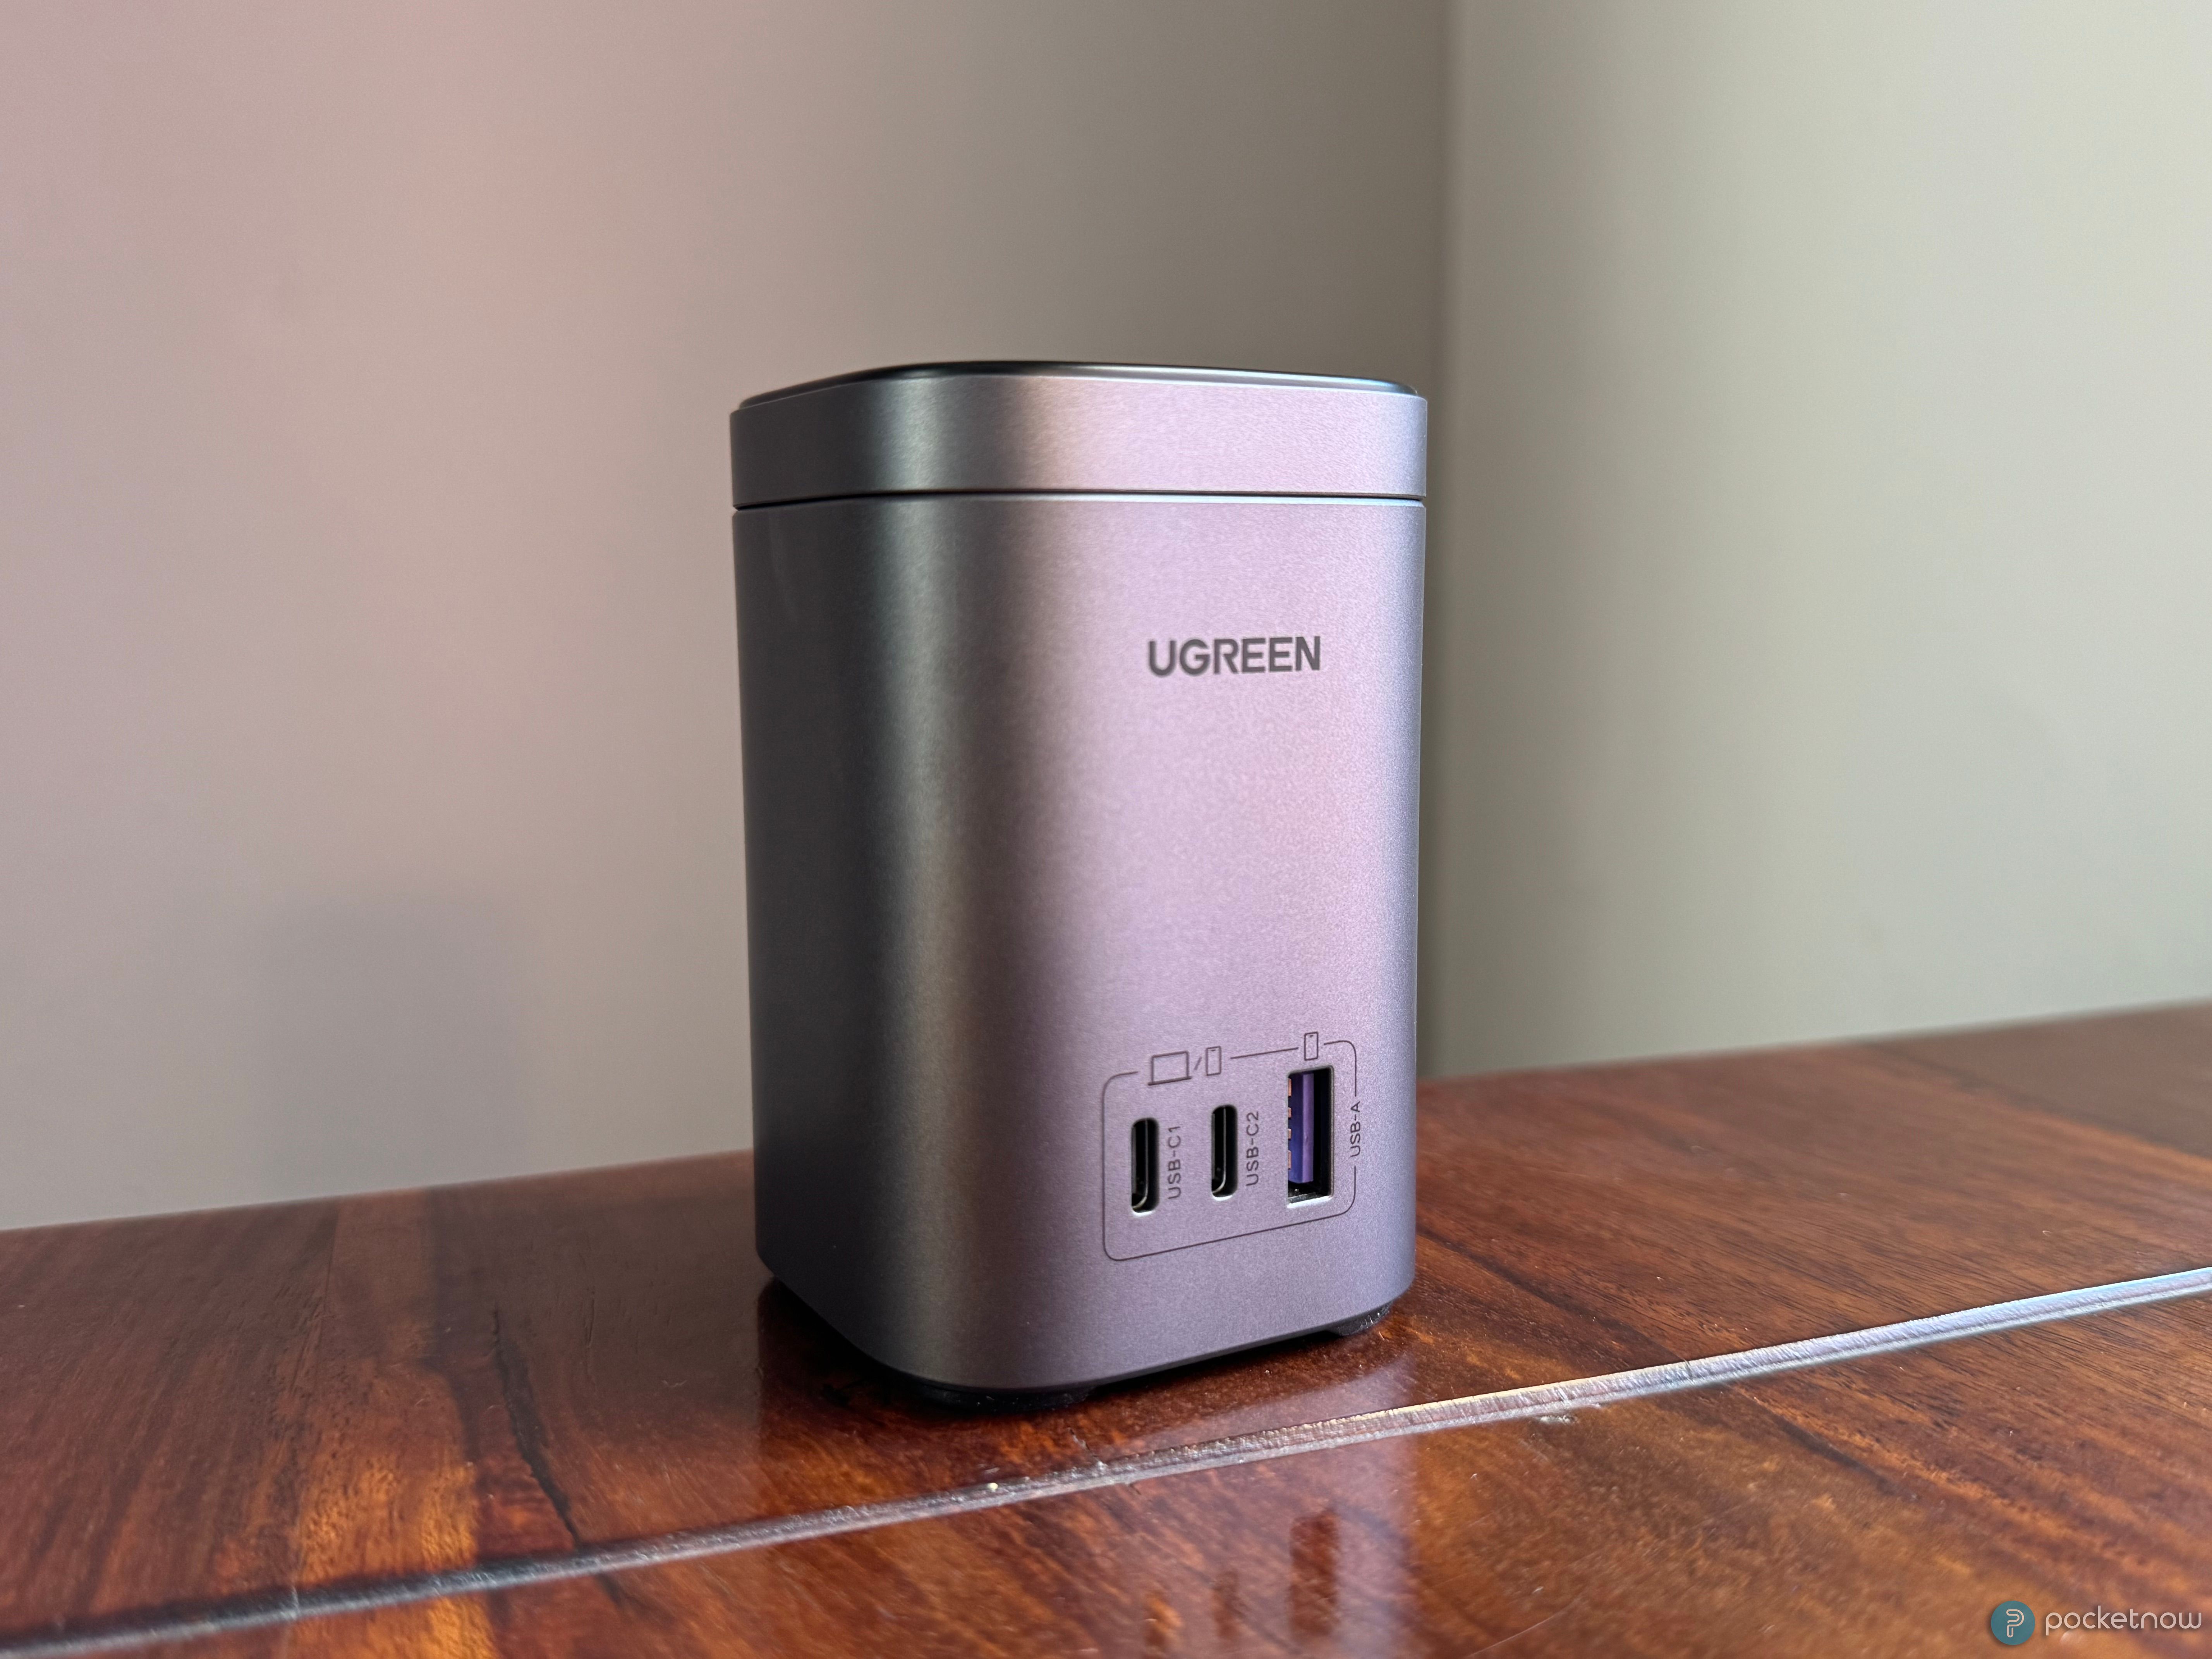 Ugreen Nexode 100W GaN with 15W MagSafe Charger Station